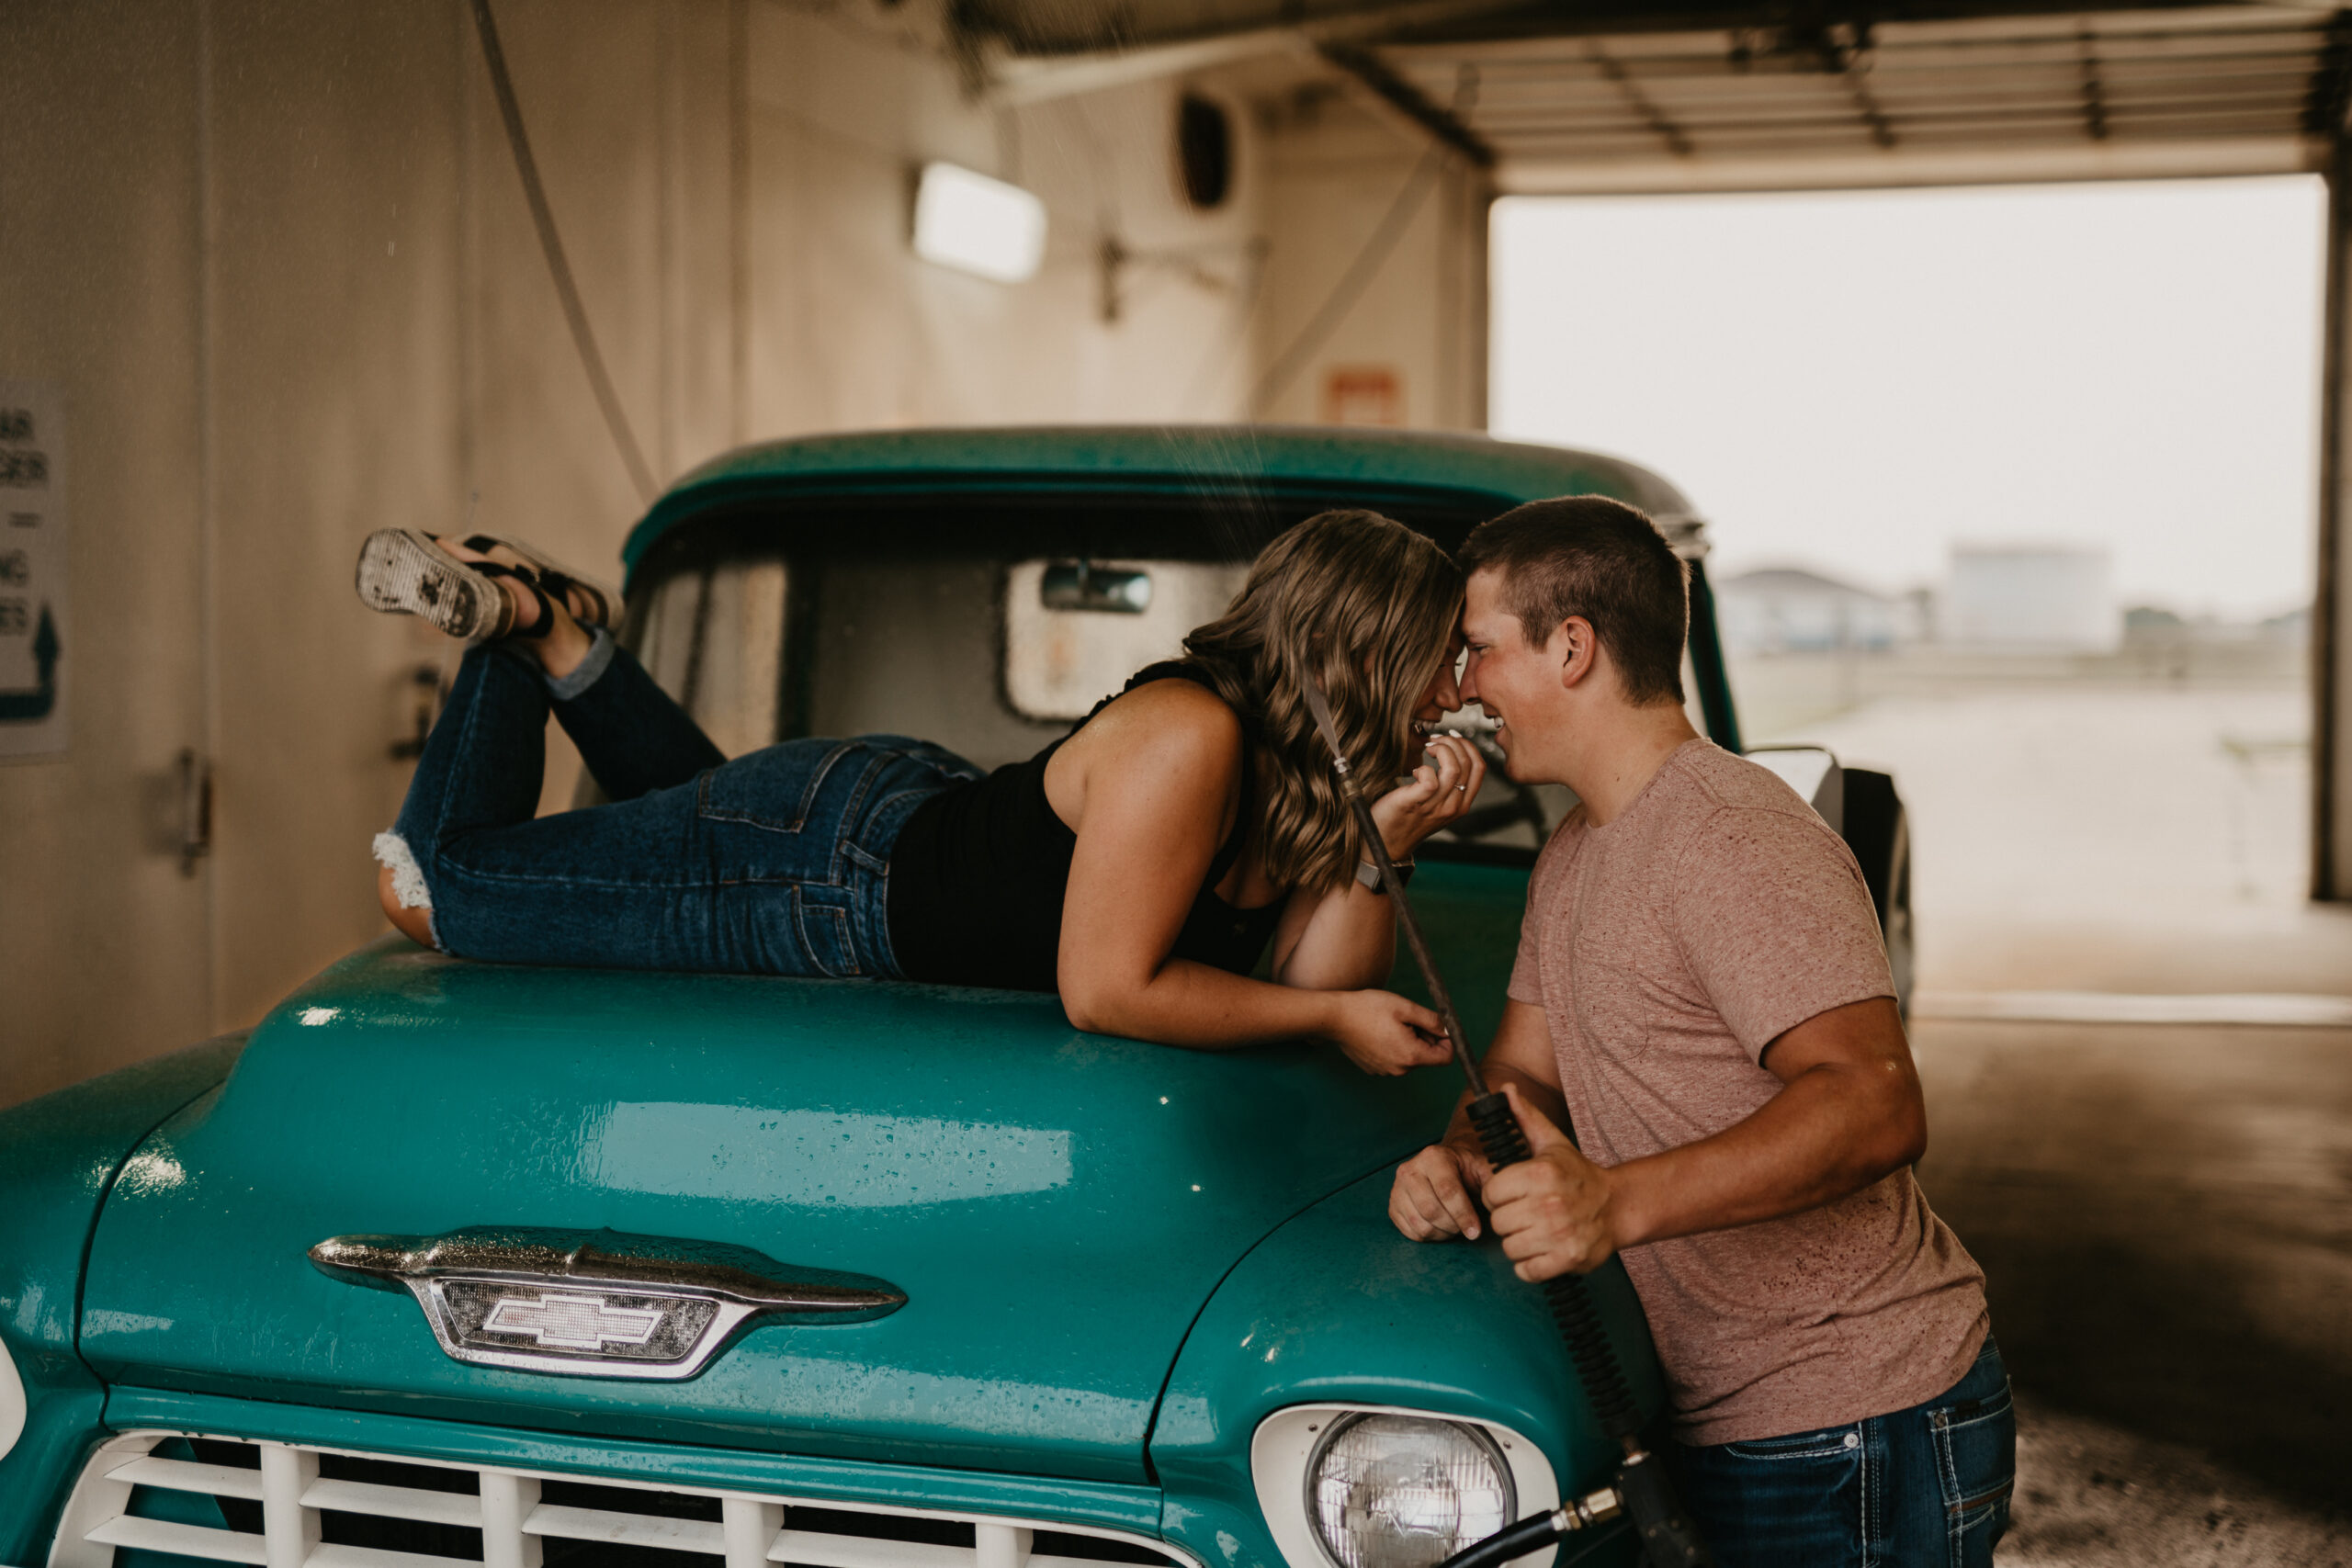 Creating a unique engagement photography session with a sexy car wash photo shoot including a vintage Chevrolet truck.